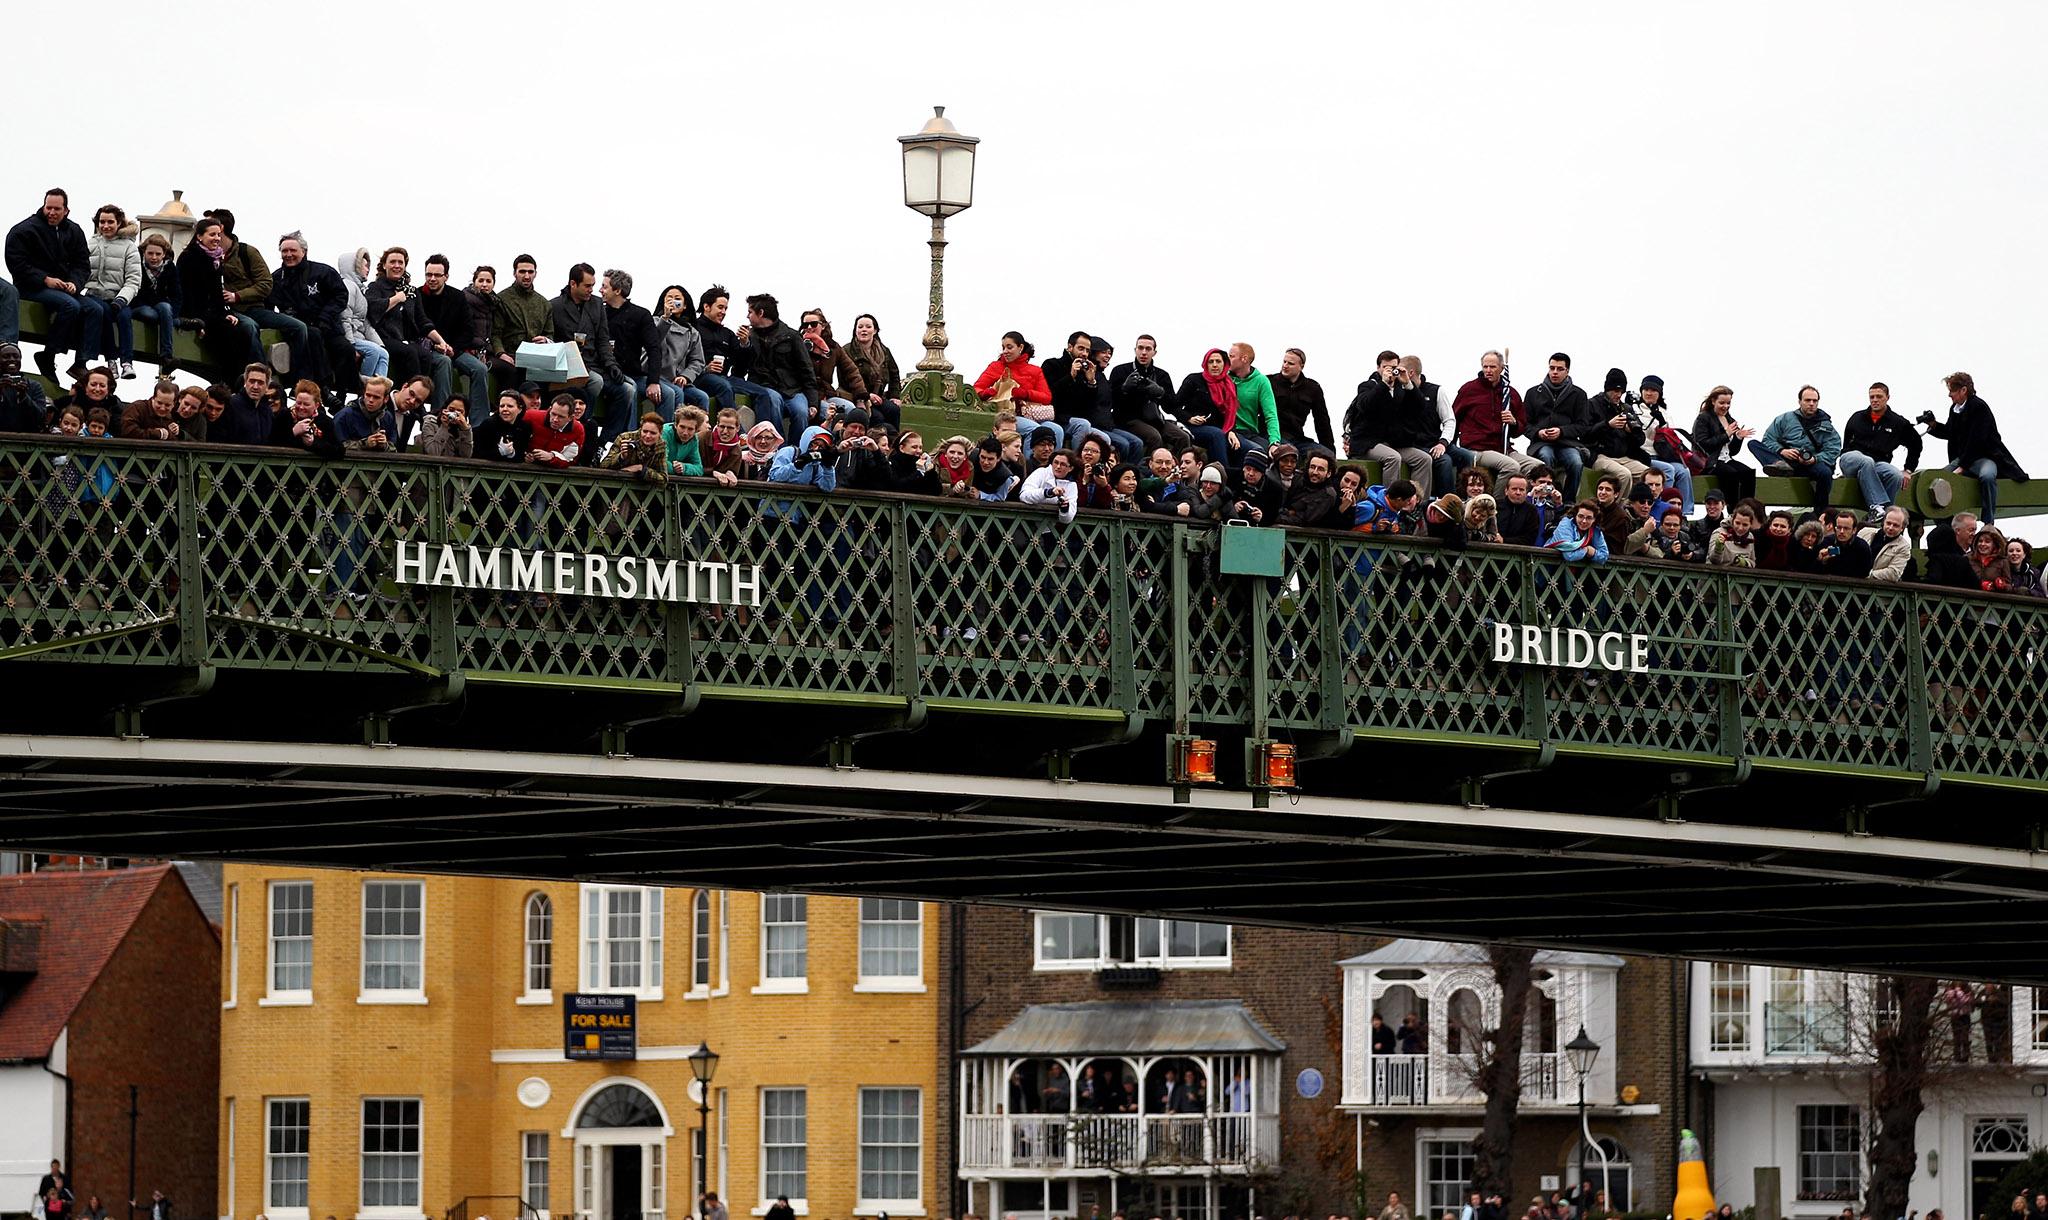 Hammersmith Bridge has been closed to traffic for almost a year